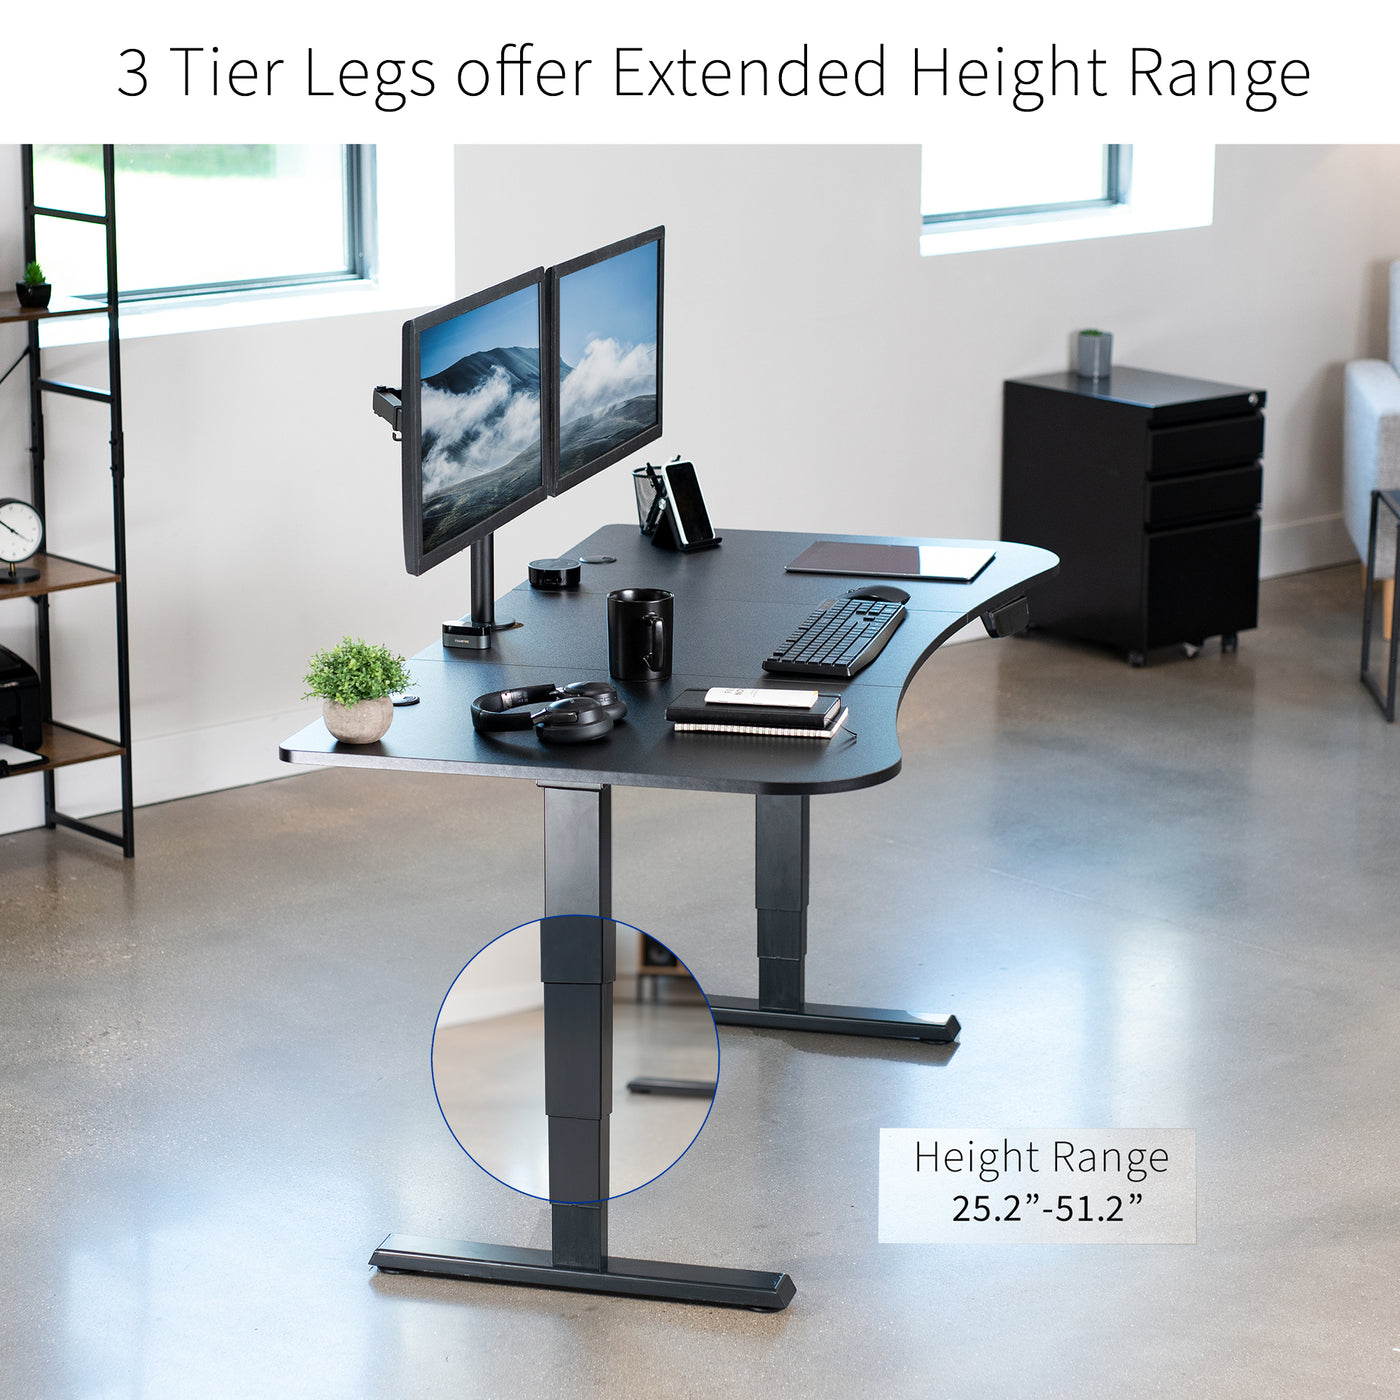 Minimalist office space with an electric sit-to-stand desk supporting a hefty weight.